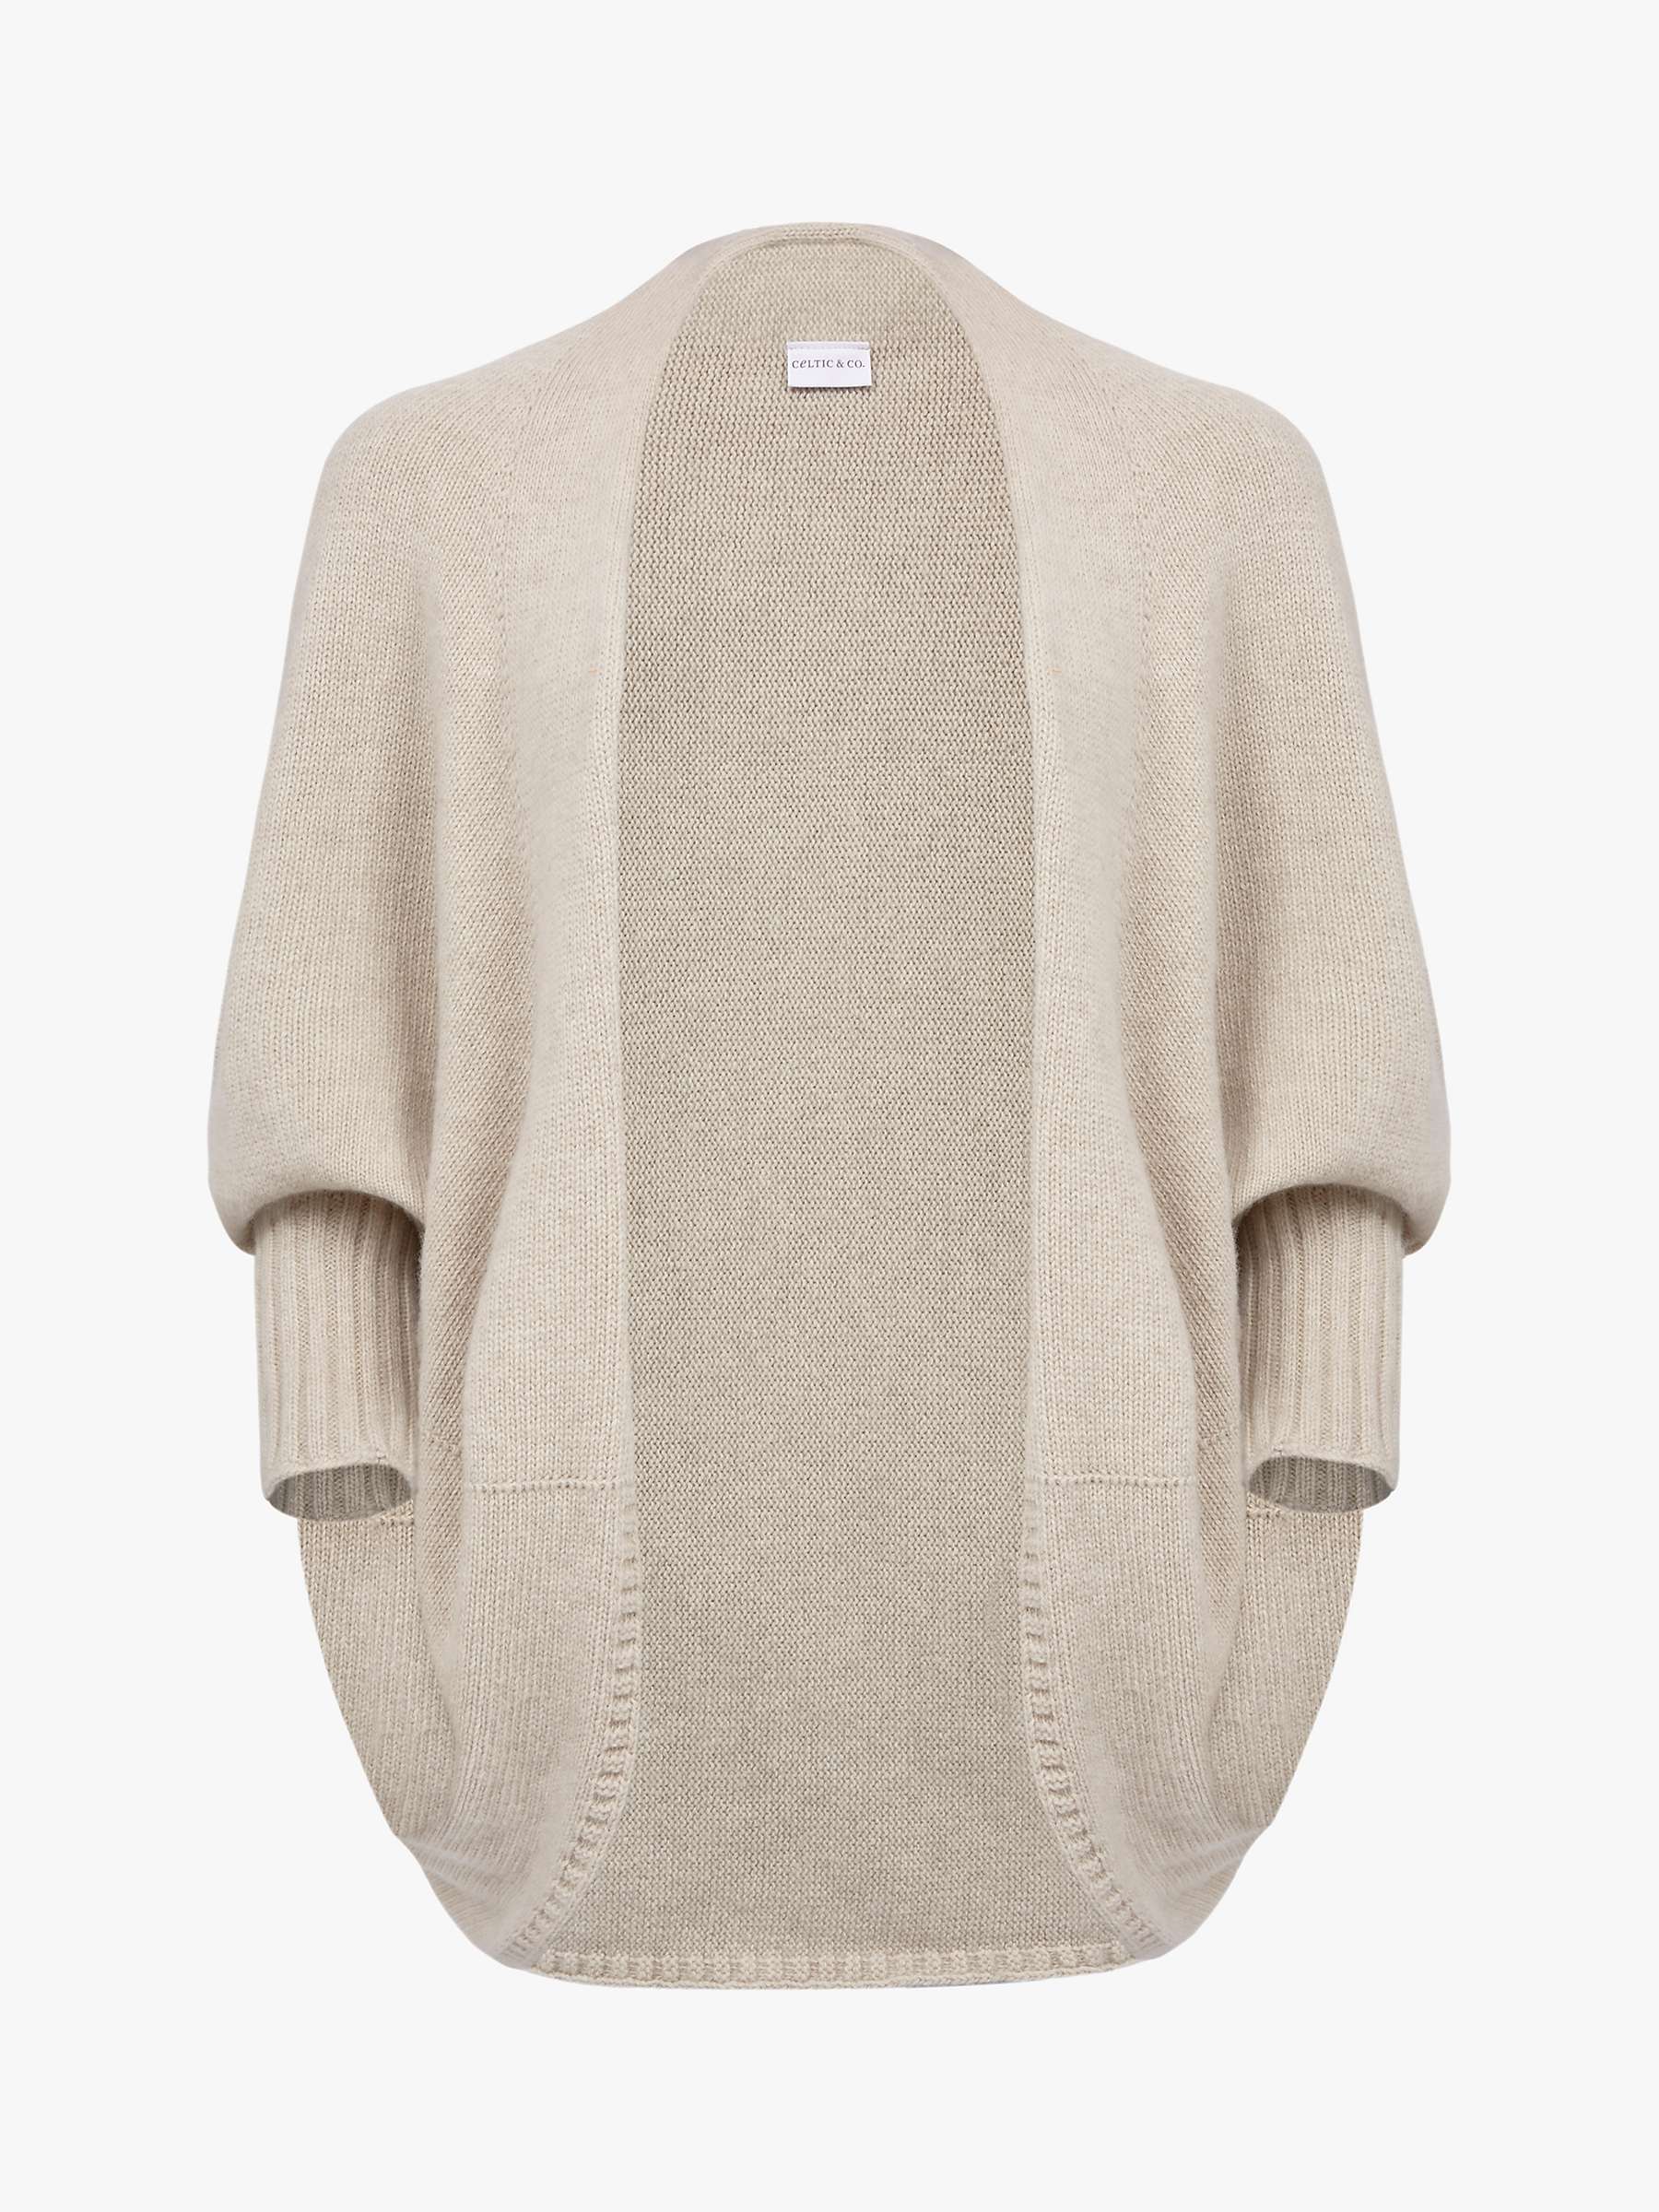 Buy Celtic & Co. Cocoon Lambswool Cardigan, Oatmeal Online at johnlewis.com